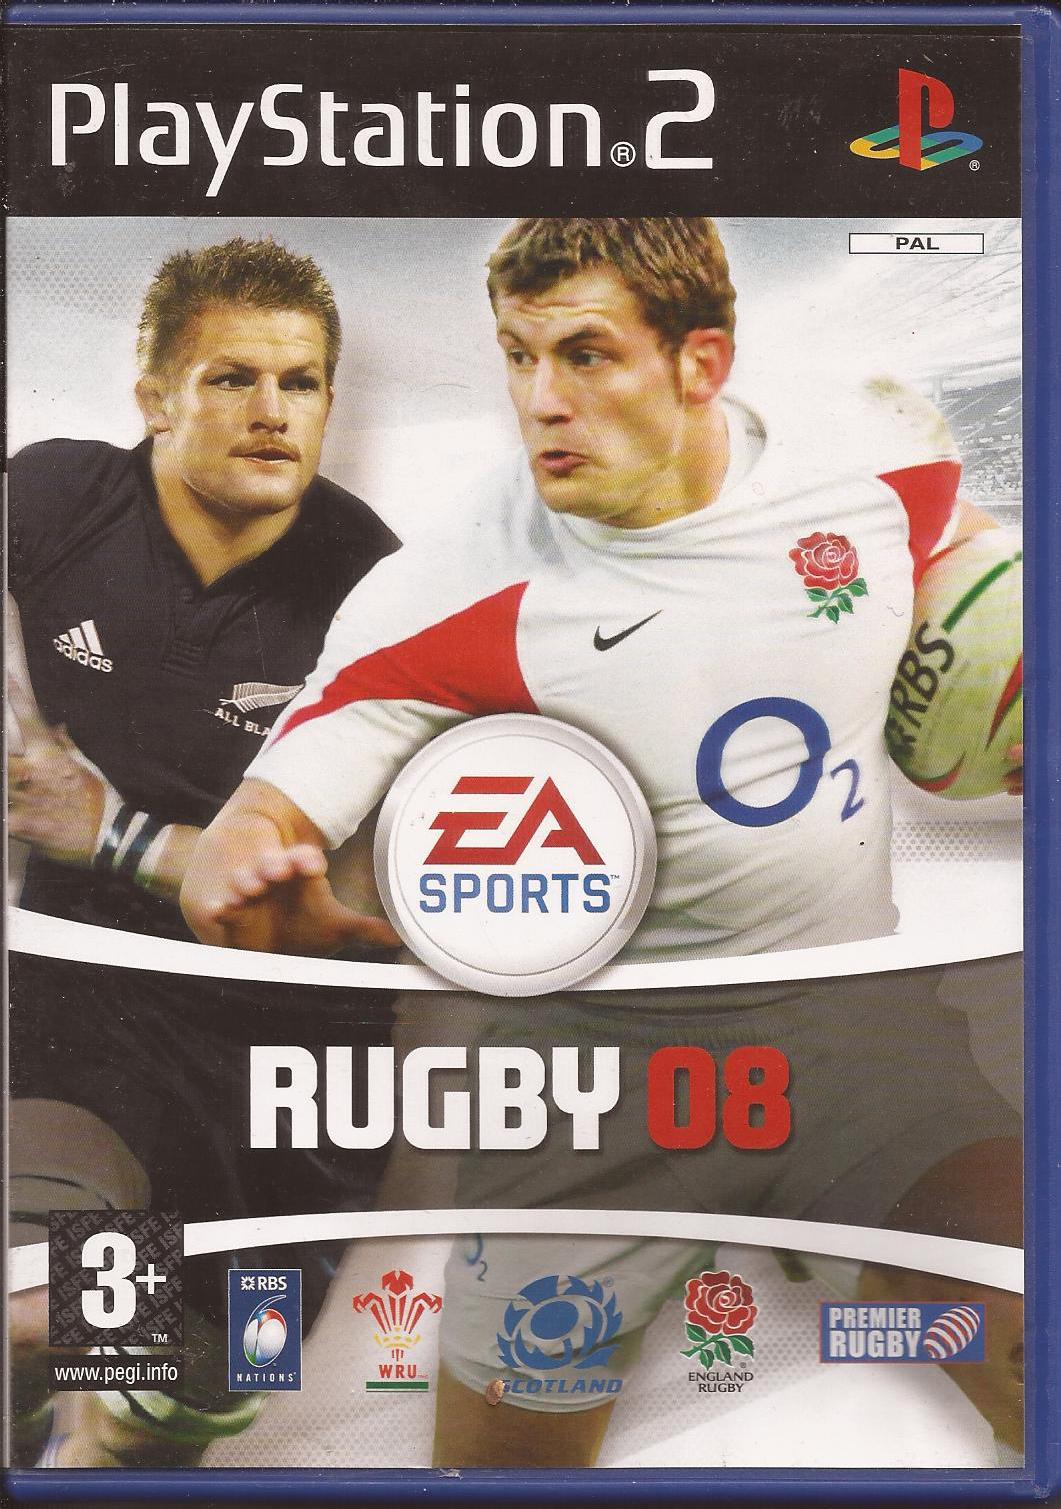 Rugby 08